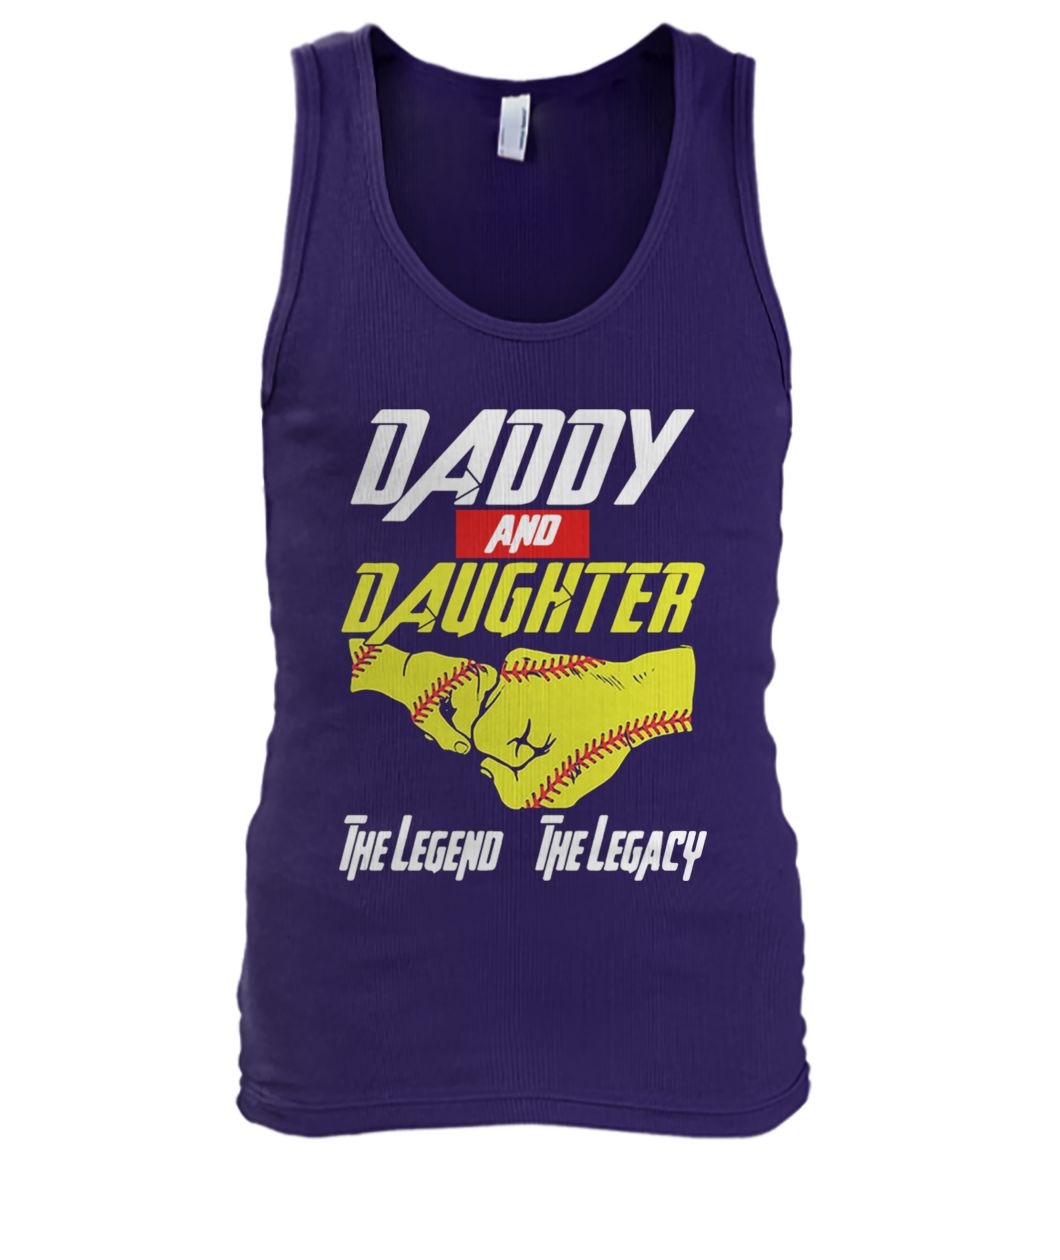 Baseball daddy and daughter the legend and the legacy marvel avengers men's tank top